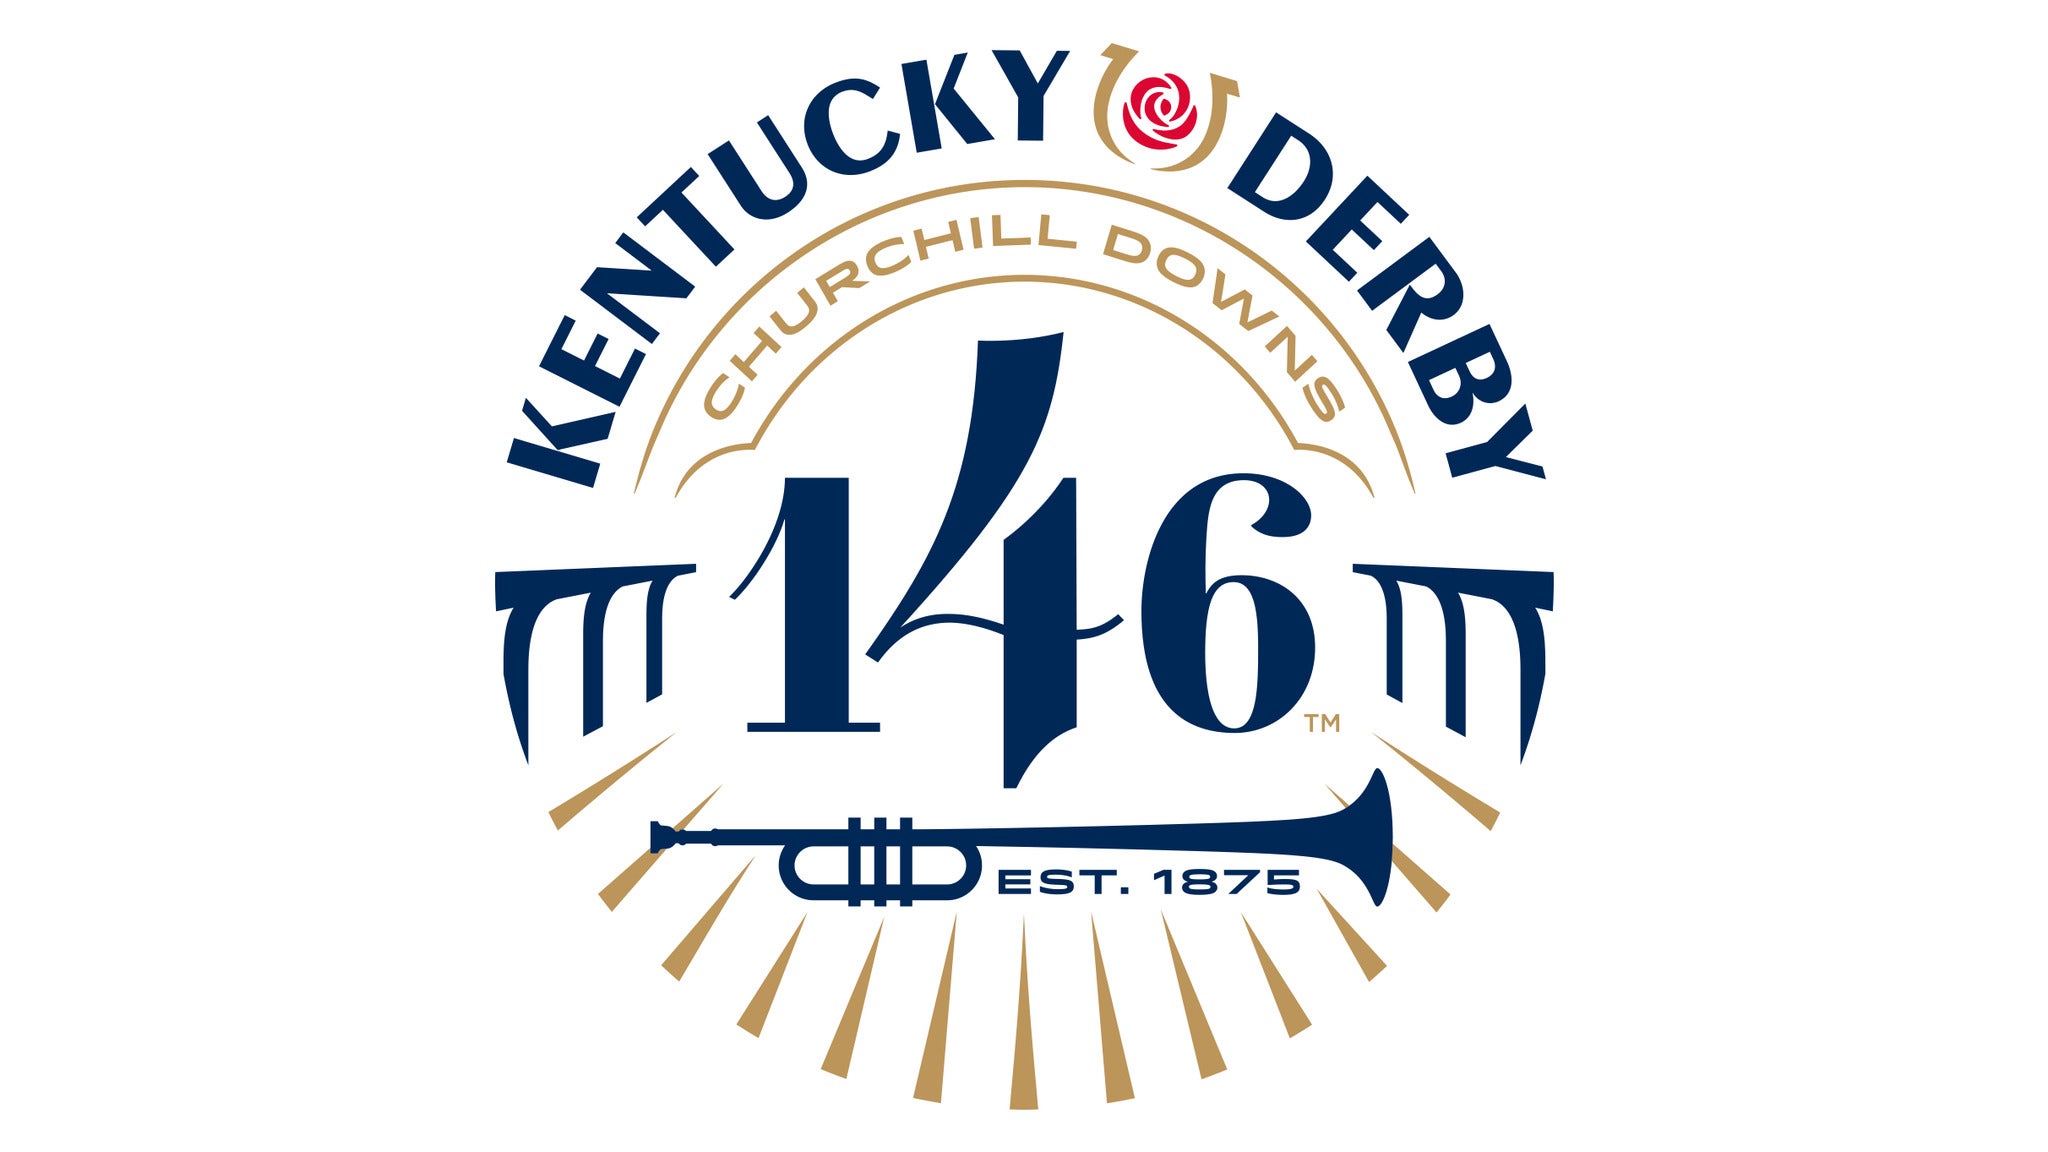 144th Ky Derby & Ky Oaks - General Admission Plan*No Longer Available in Louisville promo photo for Advance Purchase Price presale offer code